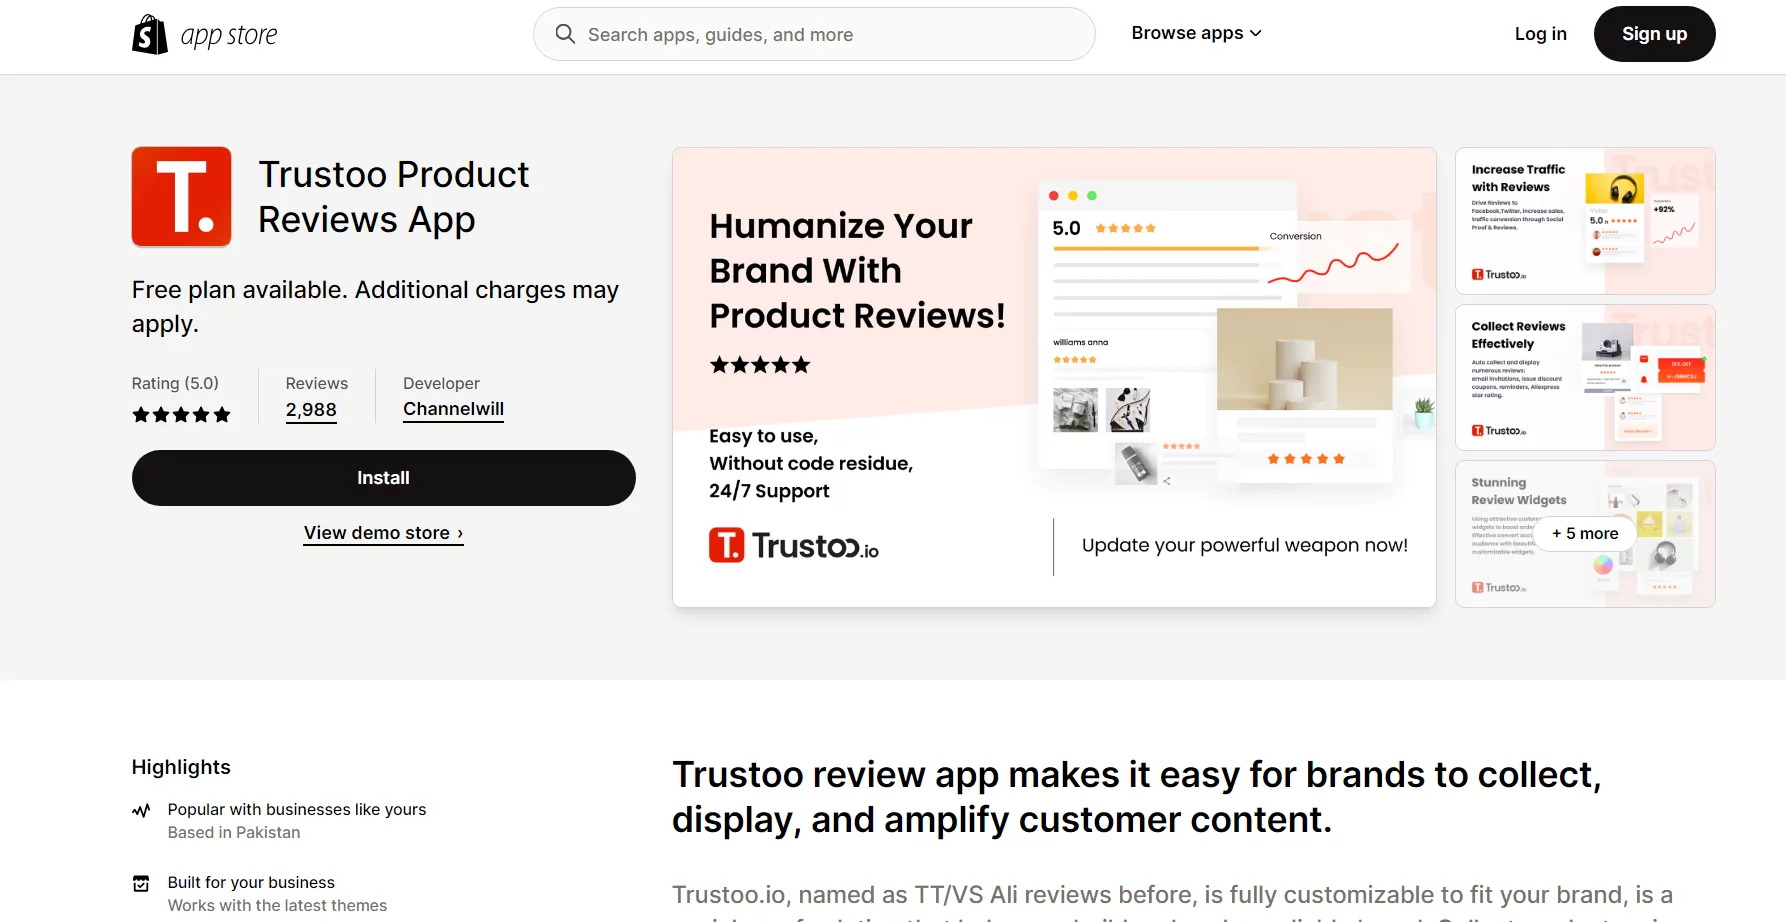 Best Shopify Checkout Apps: Trustoo Product Reviews App